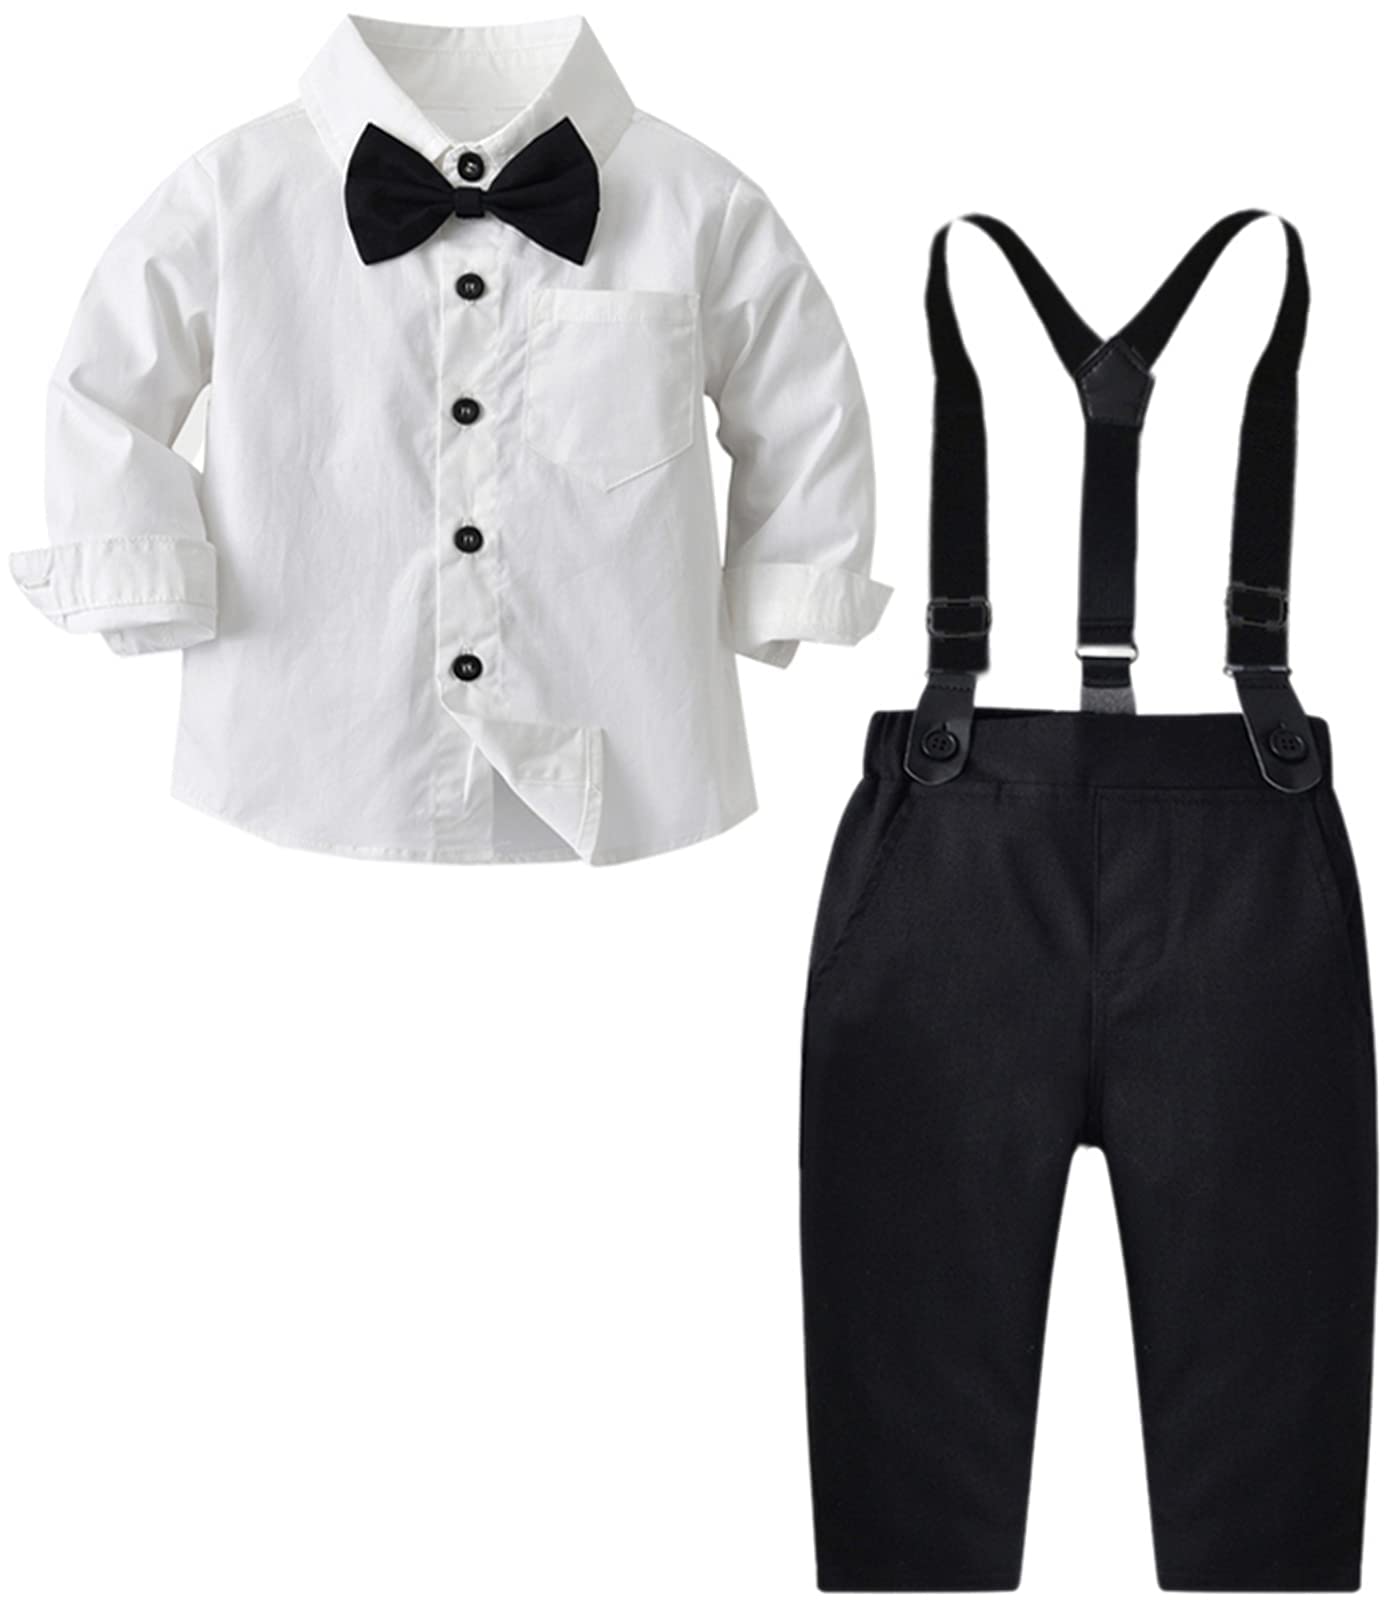 Sangtree Boys Dress Clothes Set, 2Pcs Clothing Set For Boys Of Classic Formal Shirt With Bowtie  Suspender Pants, White 2, 18-24